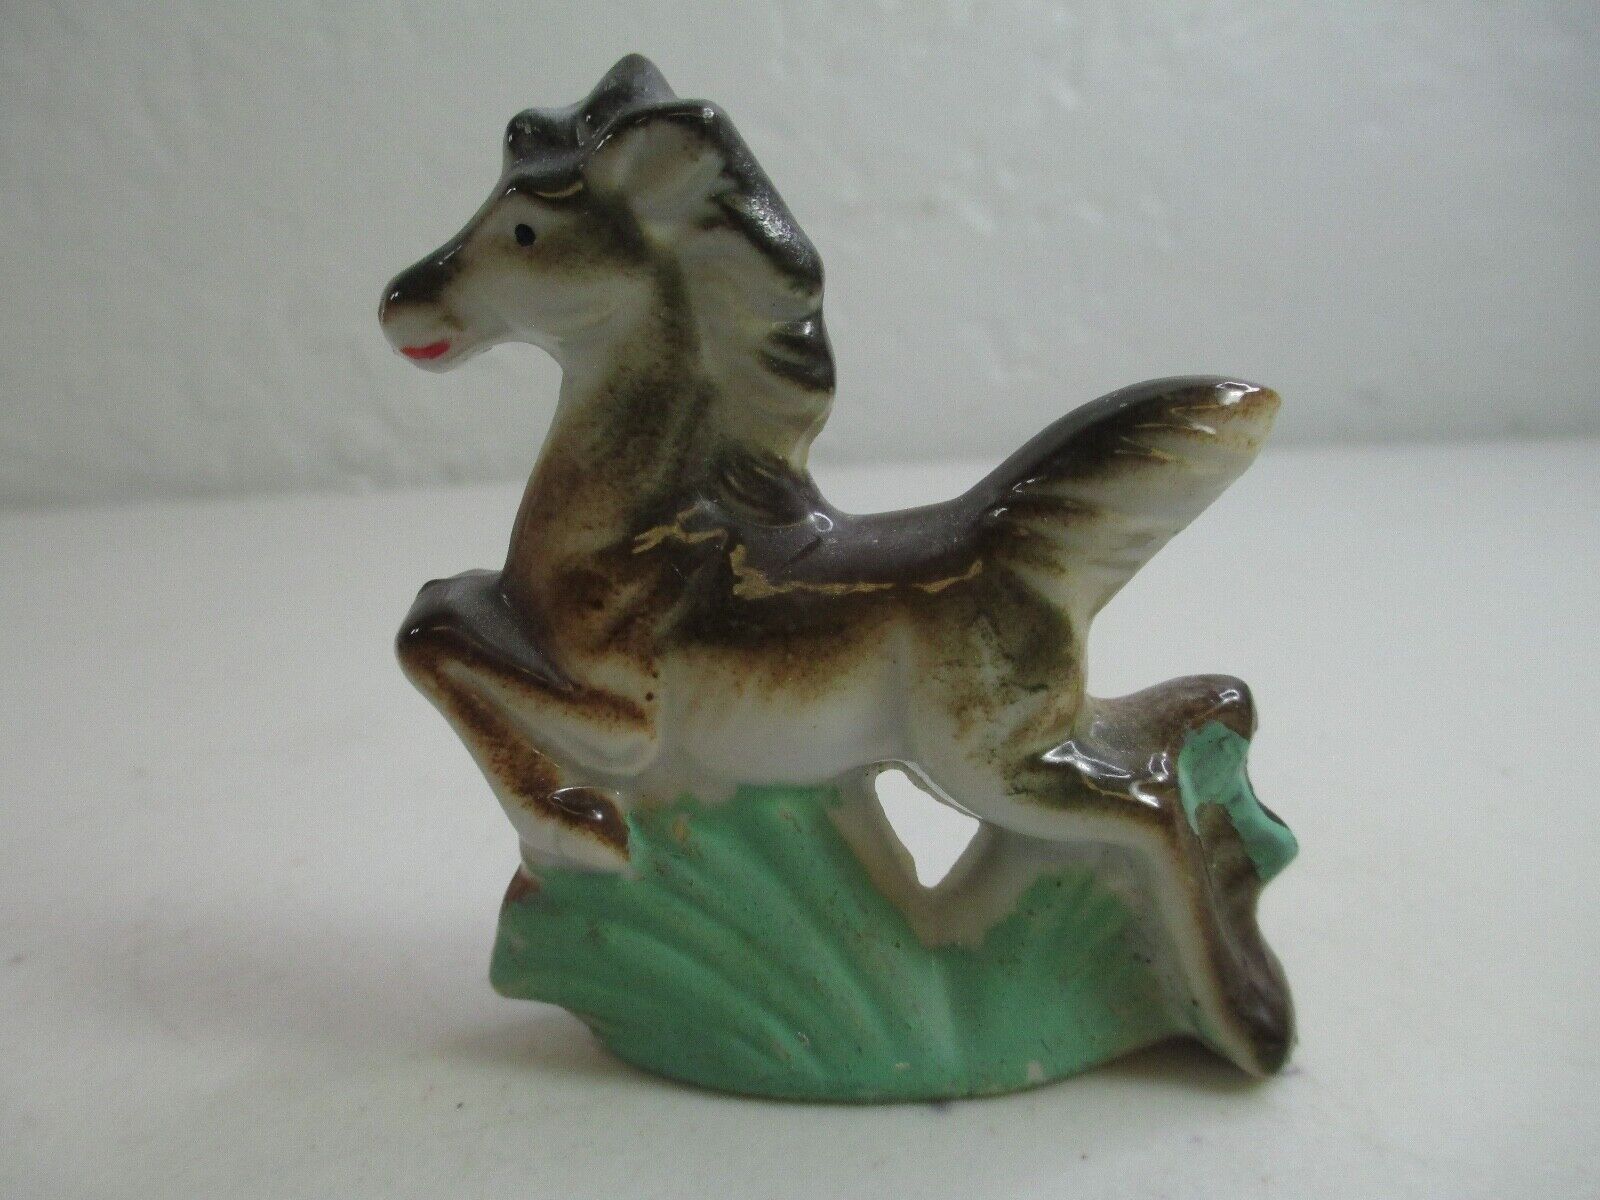 Vintage Ceramic horse leaping jumping figurine